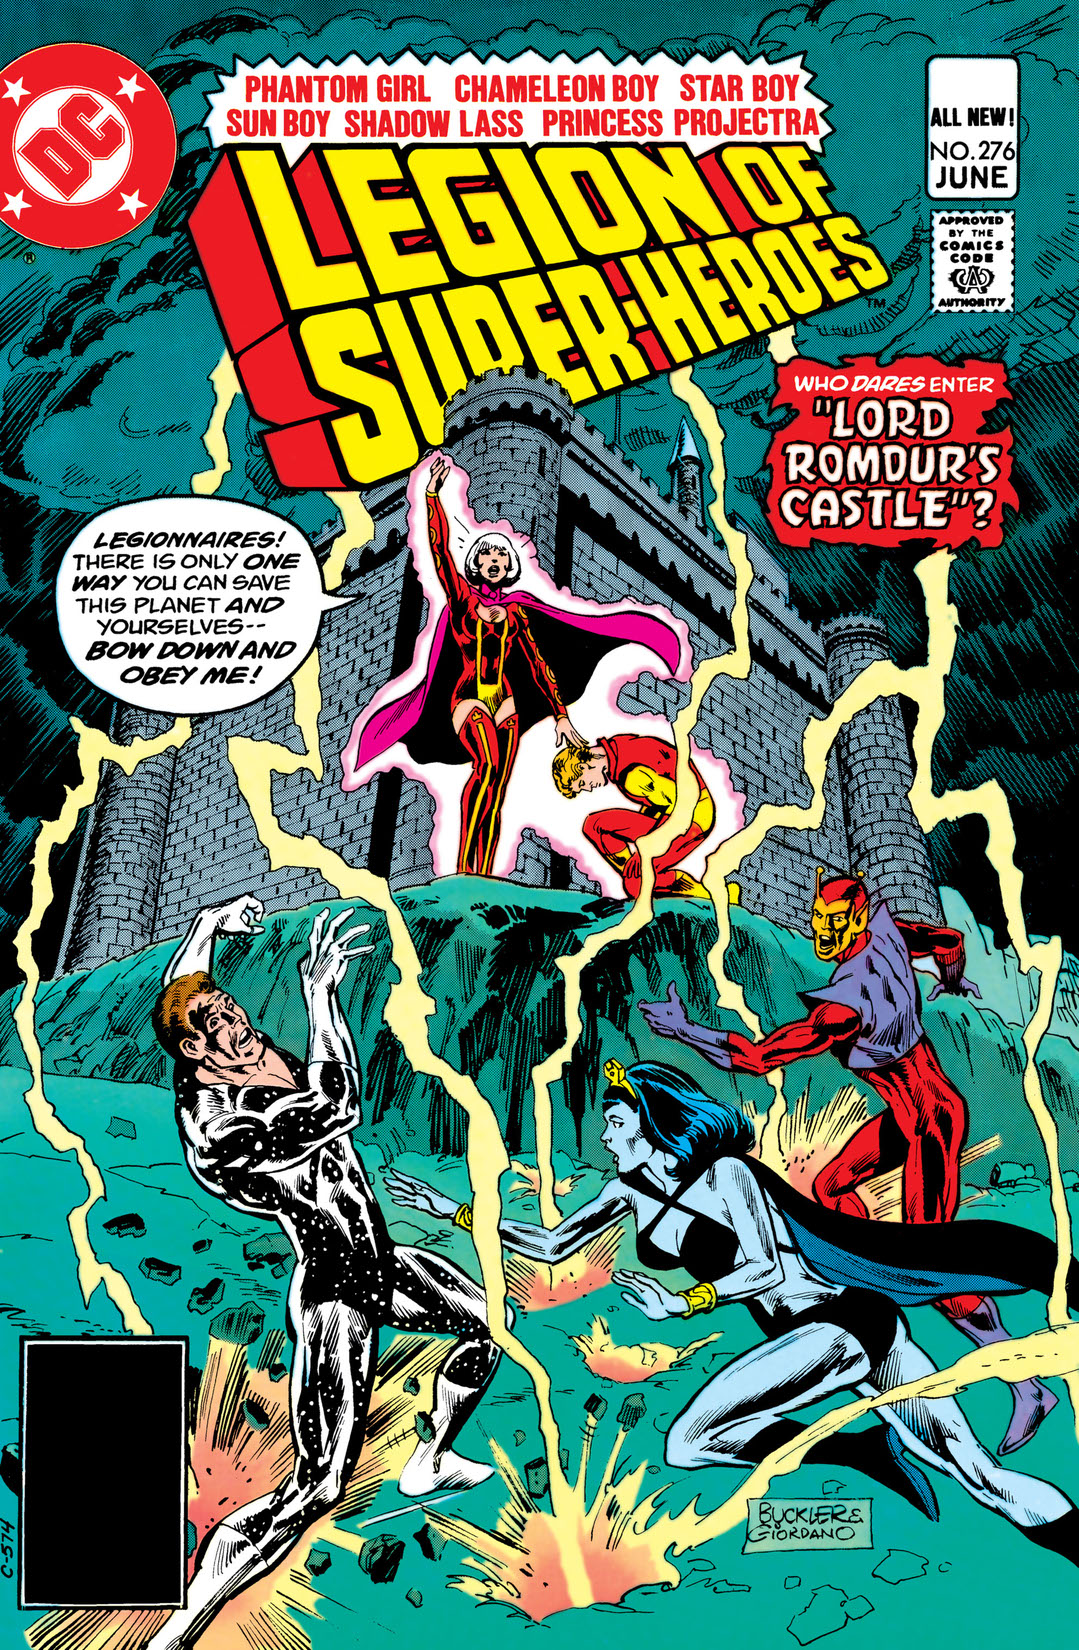 The Legion of Super-Heroes (1980-) #276 preview images